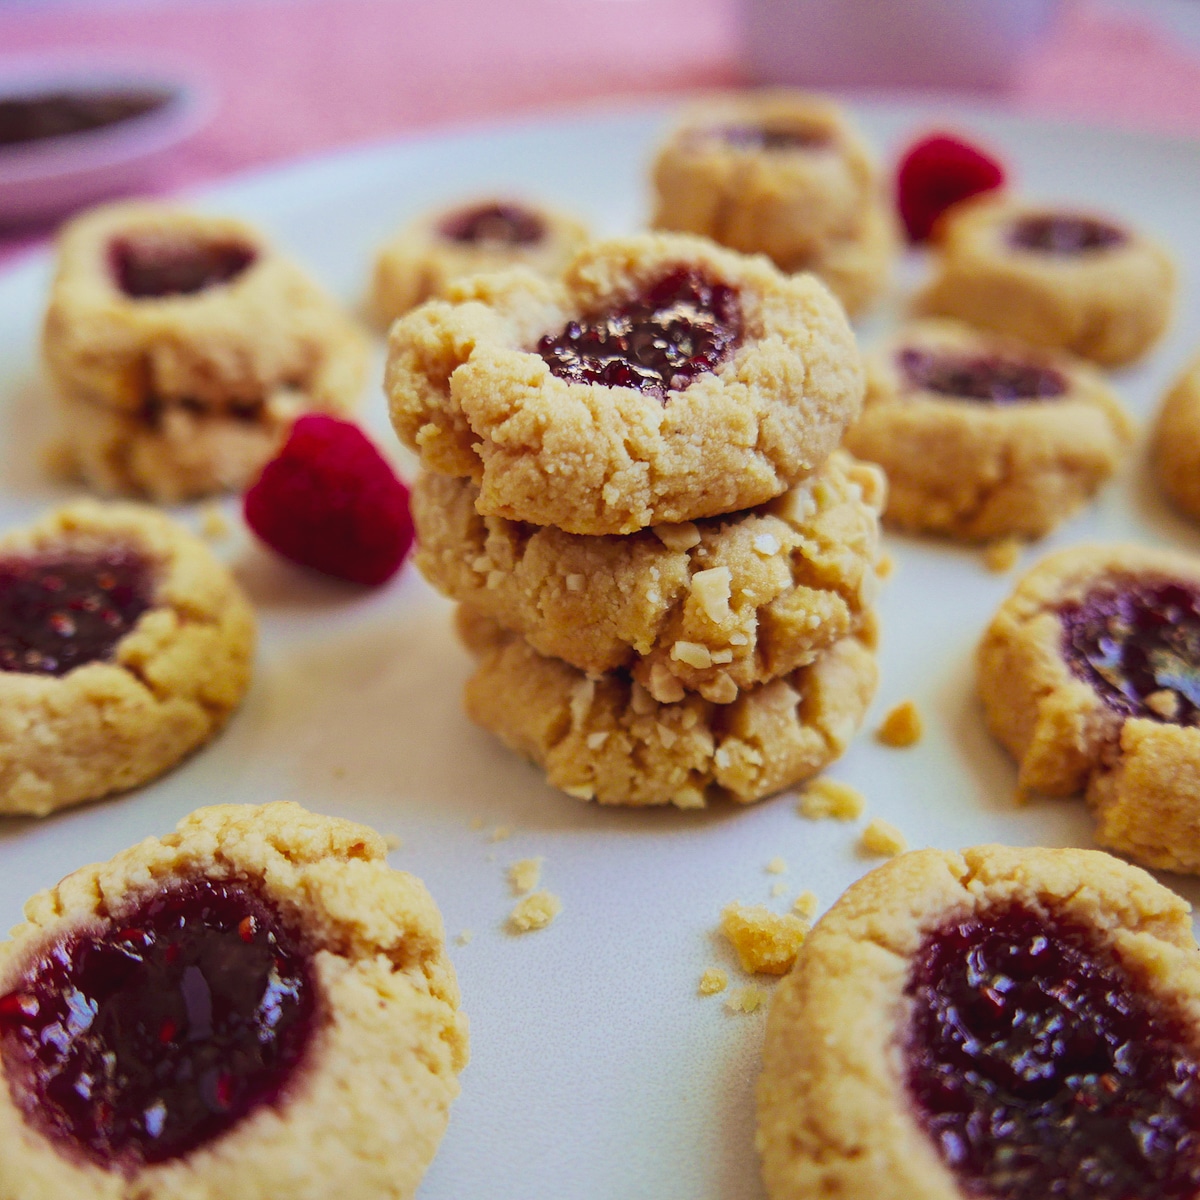 thumbprint cookies arranged on a white platter with cookie crumbs.